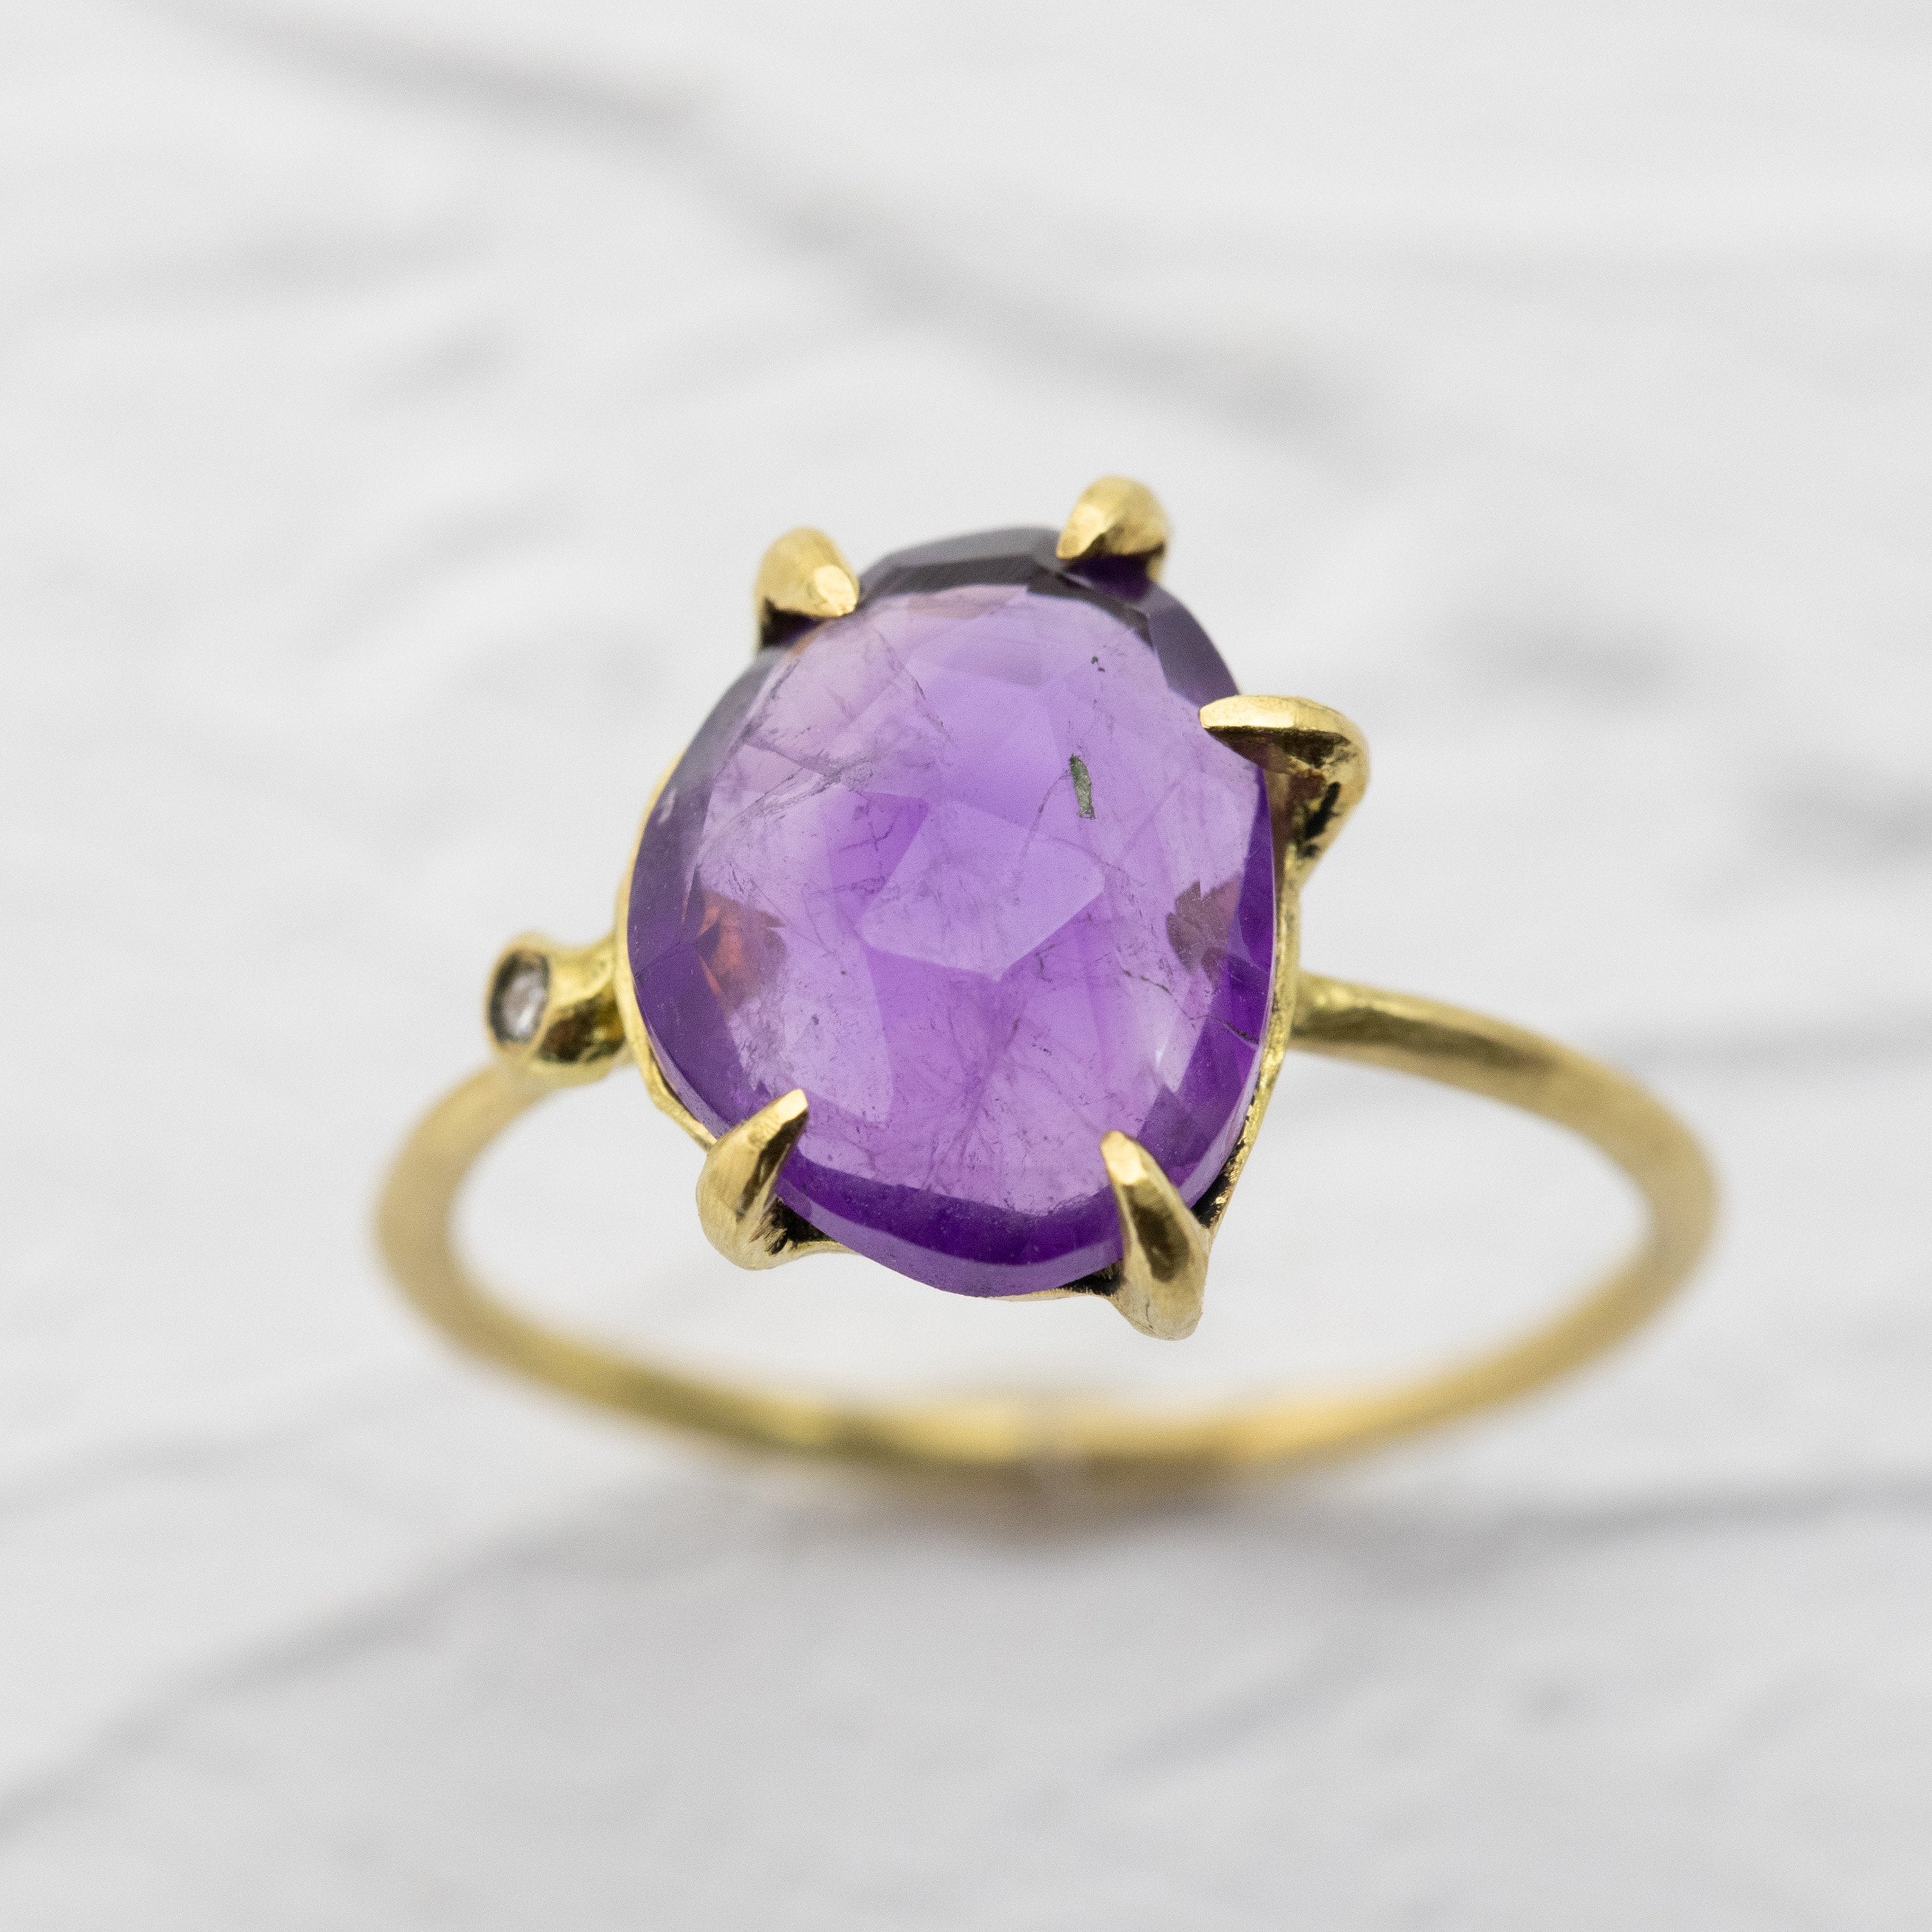 Amethyst Ring with Diamond Accent (18k)